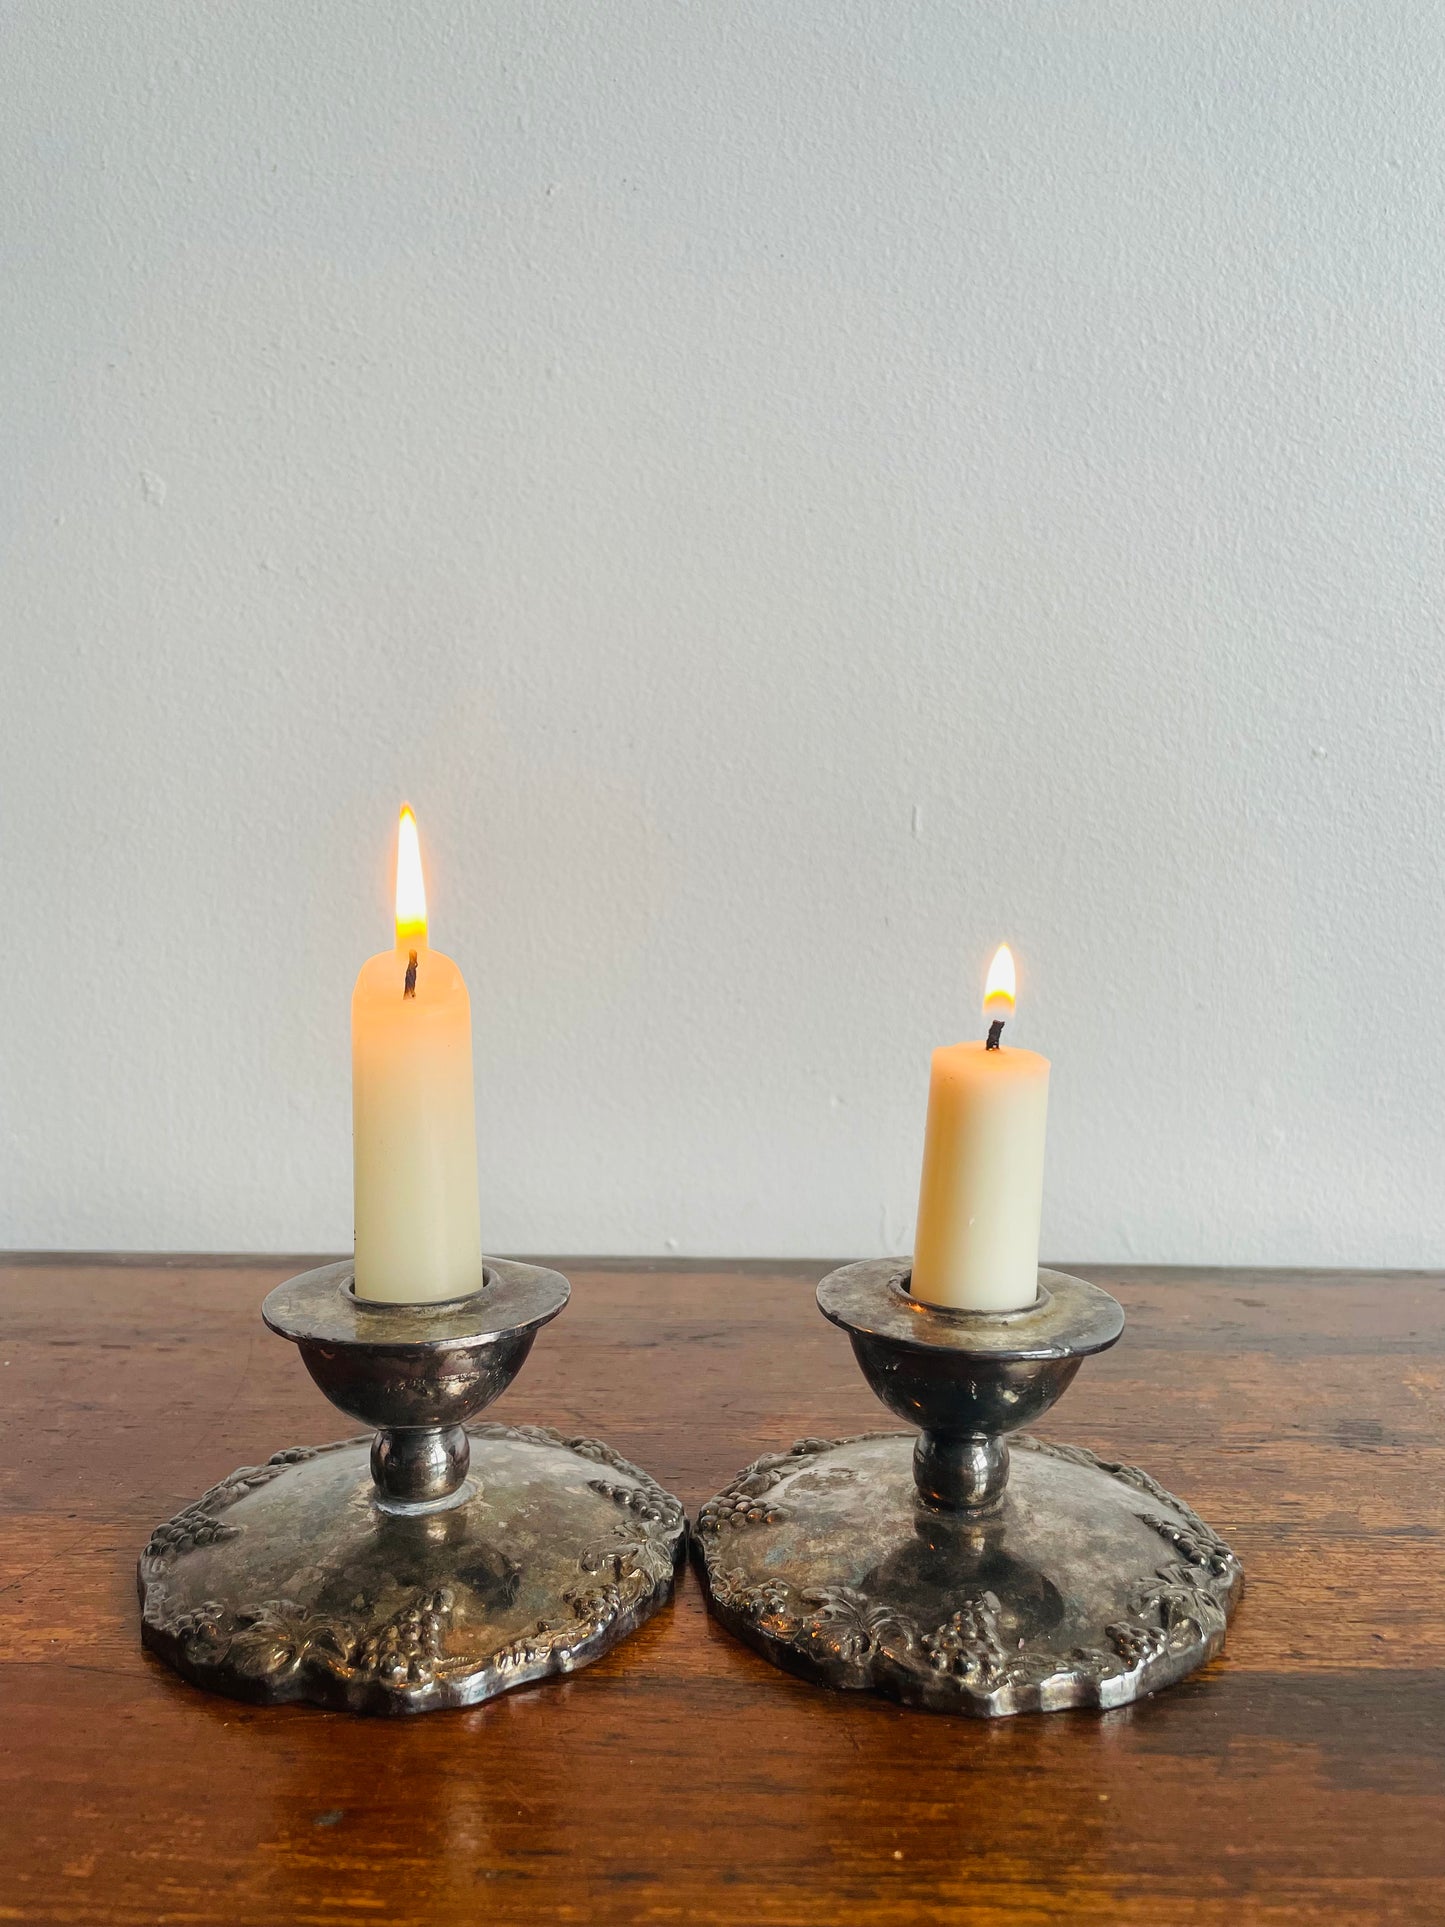 EP Lead Candlestick Holders with Grape Clusters & Vine Design - Set of 2